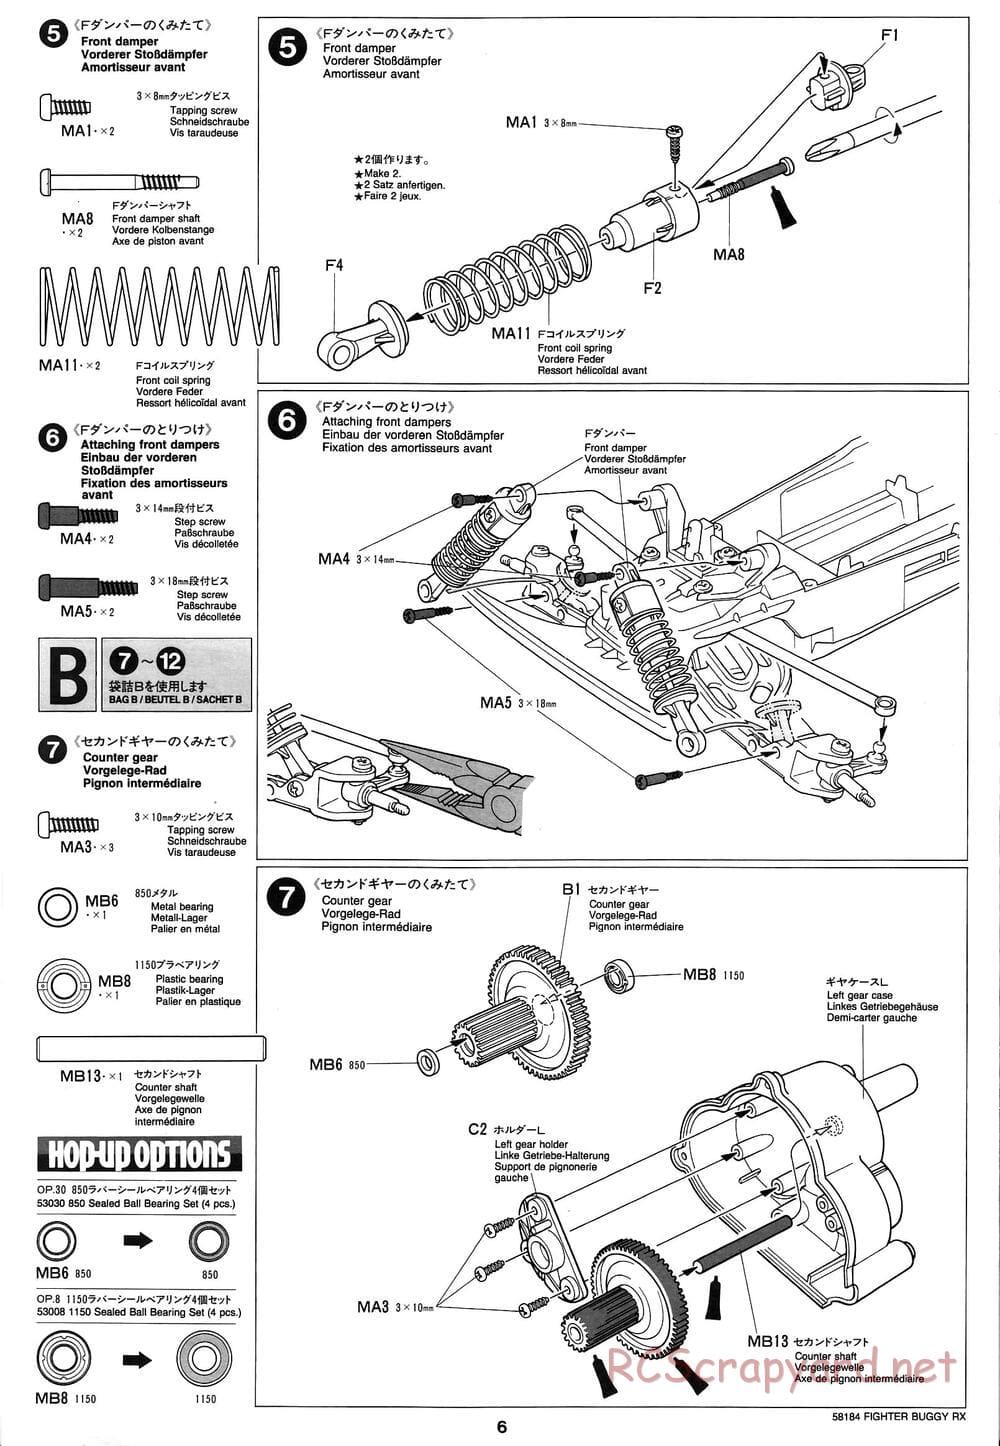 Tamiya - Fighter Buggy RX Chassis - Manual - Page 6